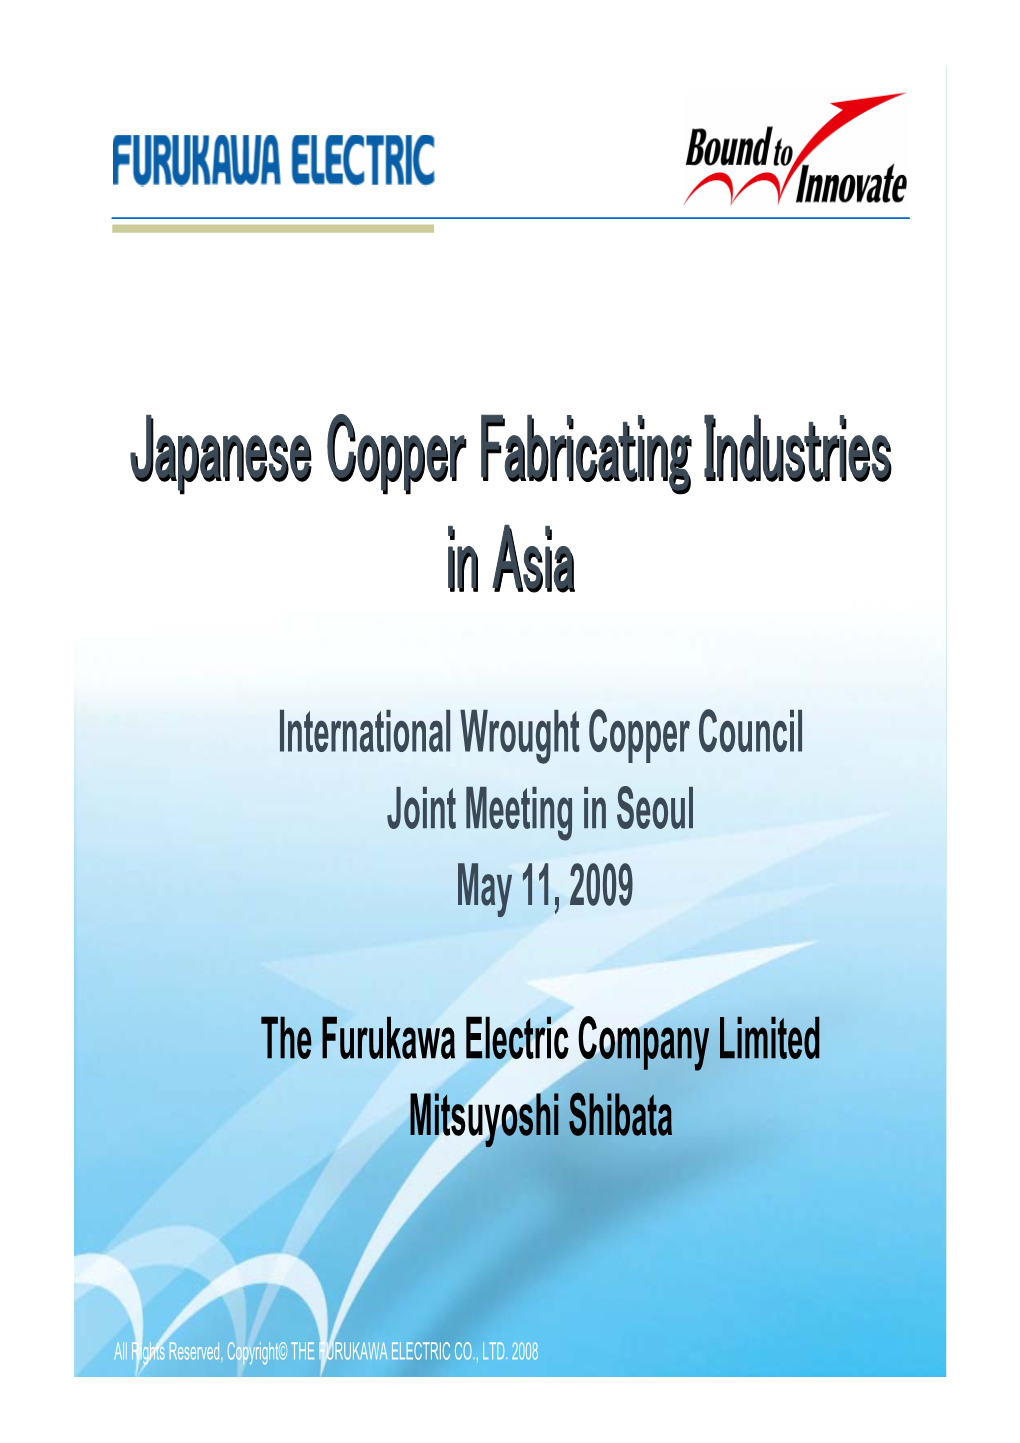 Japanese Copper Fabricating Industries in Asia